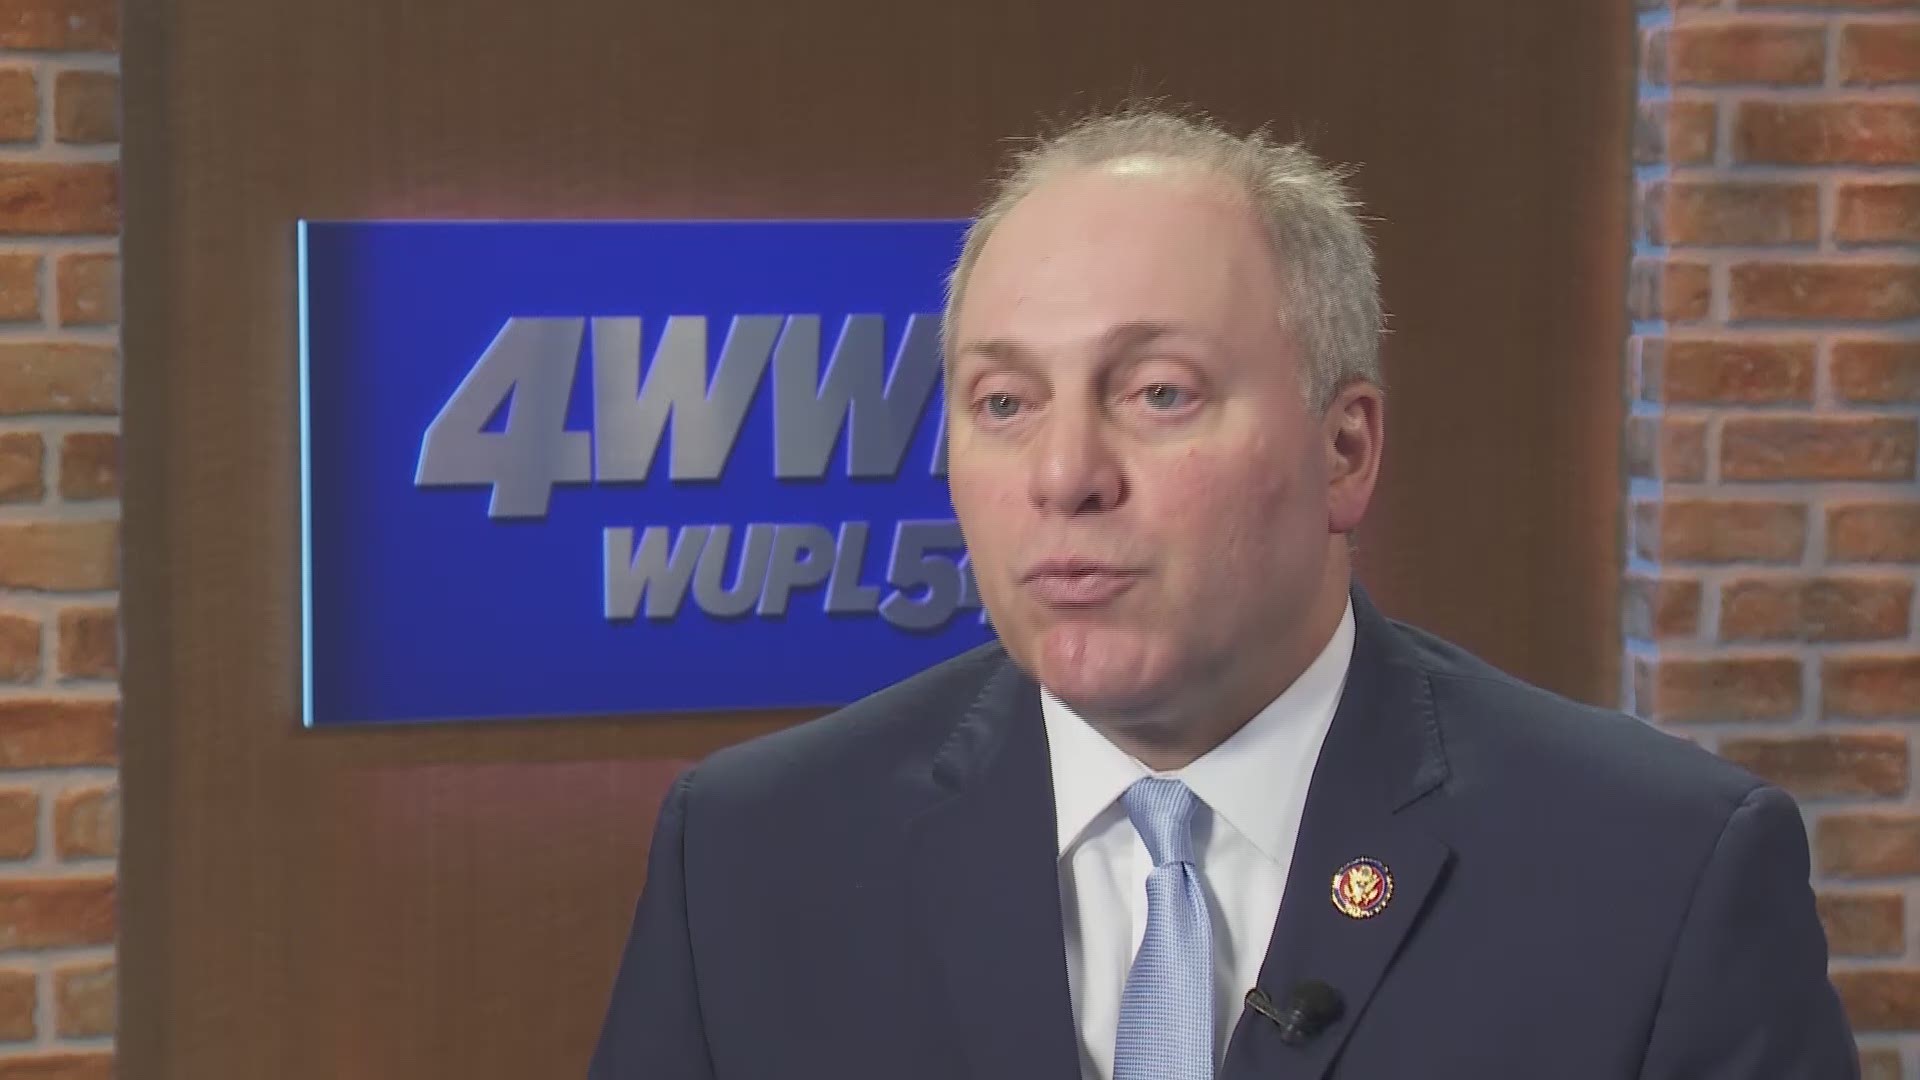 Scalise said the Democratic leaders in Congress aren’t even saying what they would be willing to accept as far as funding, and a wall. He said the opposition leaders are playing games.